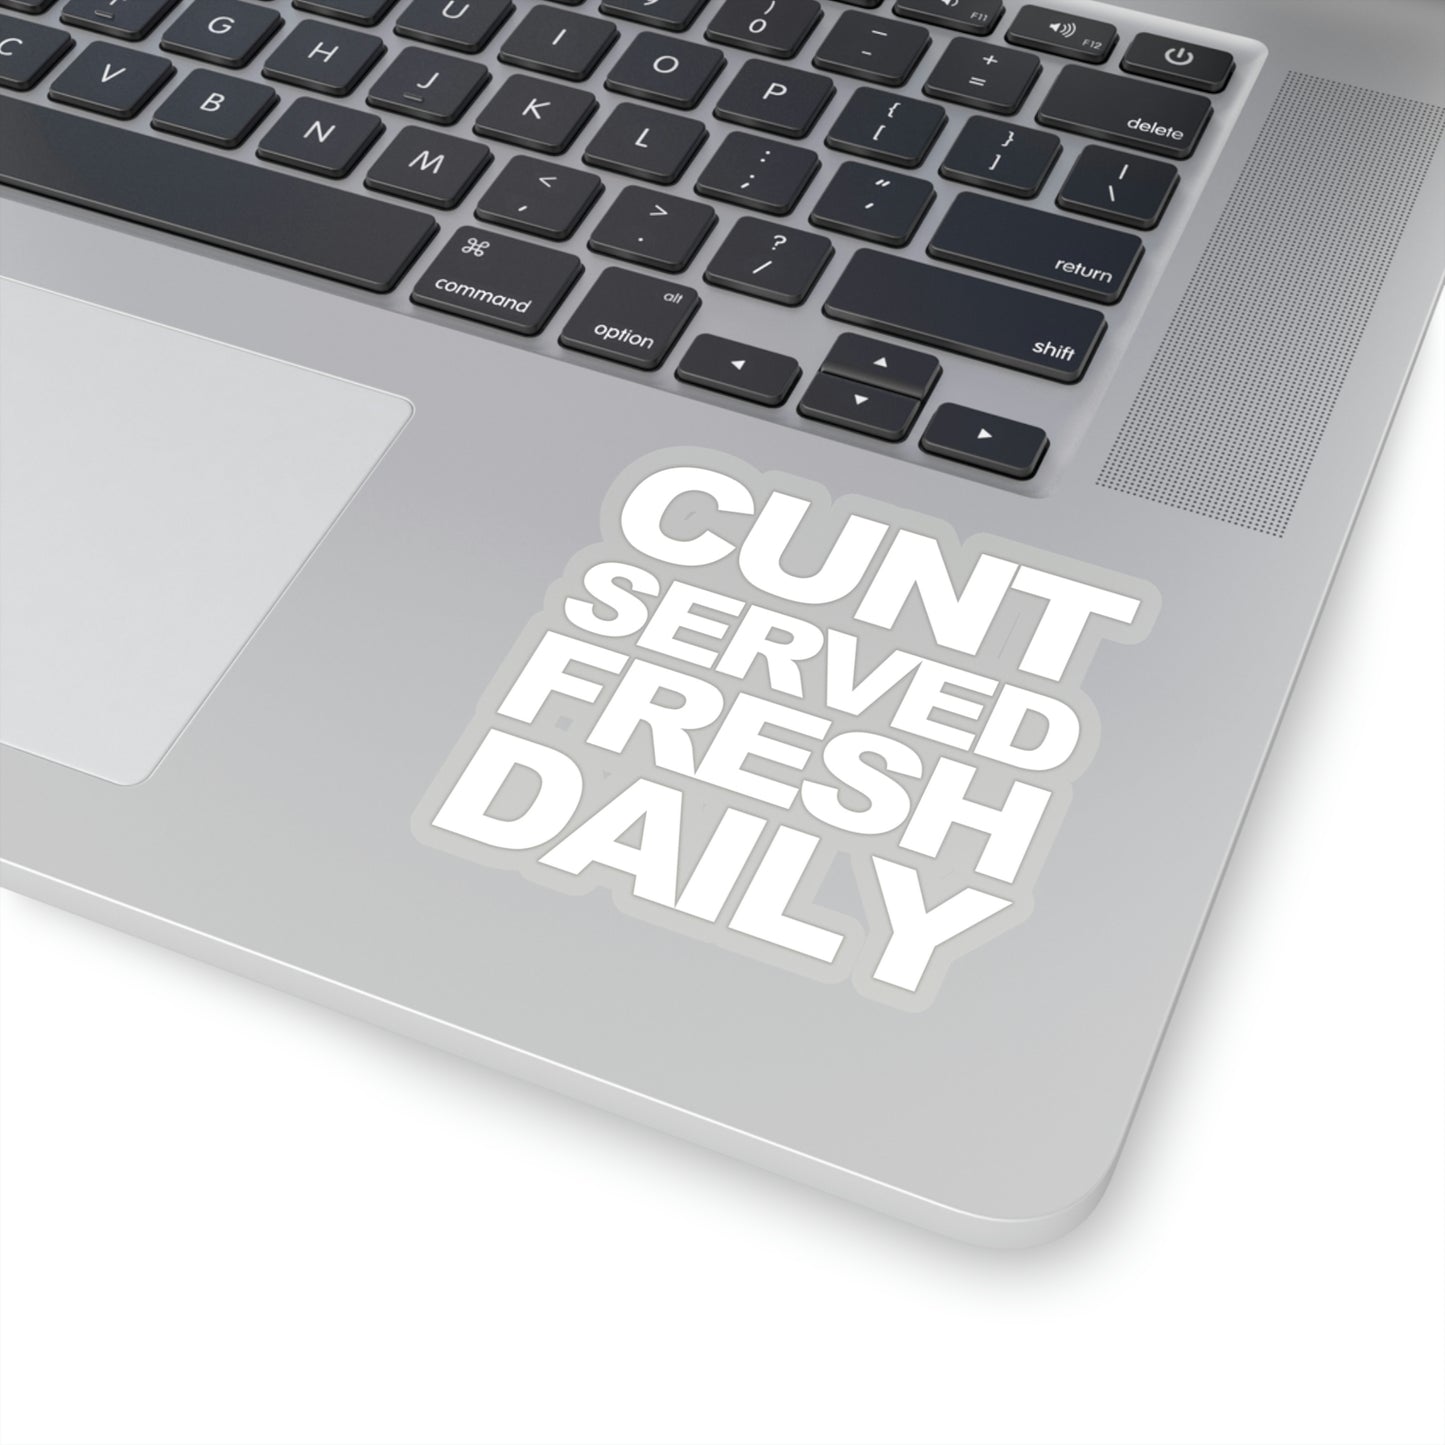 Cunt Served Fresh Daily Shirt, Y2k Aesthetic Sticker